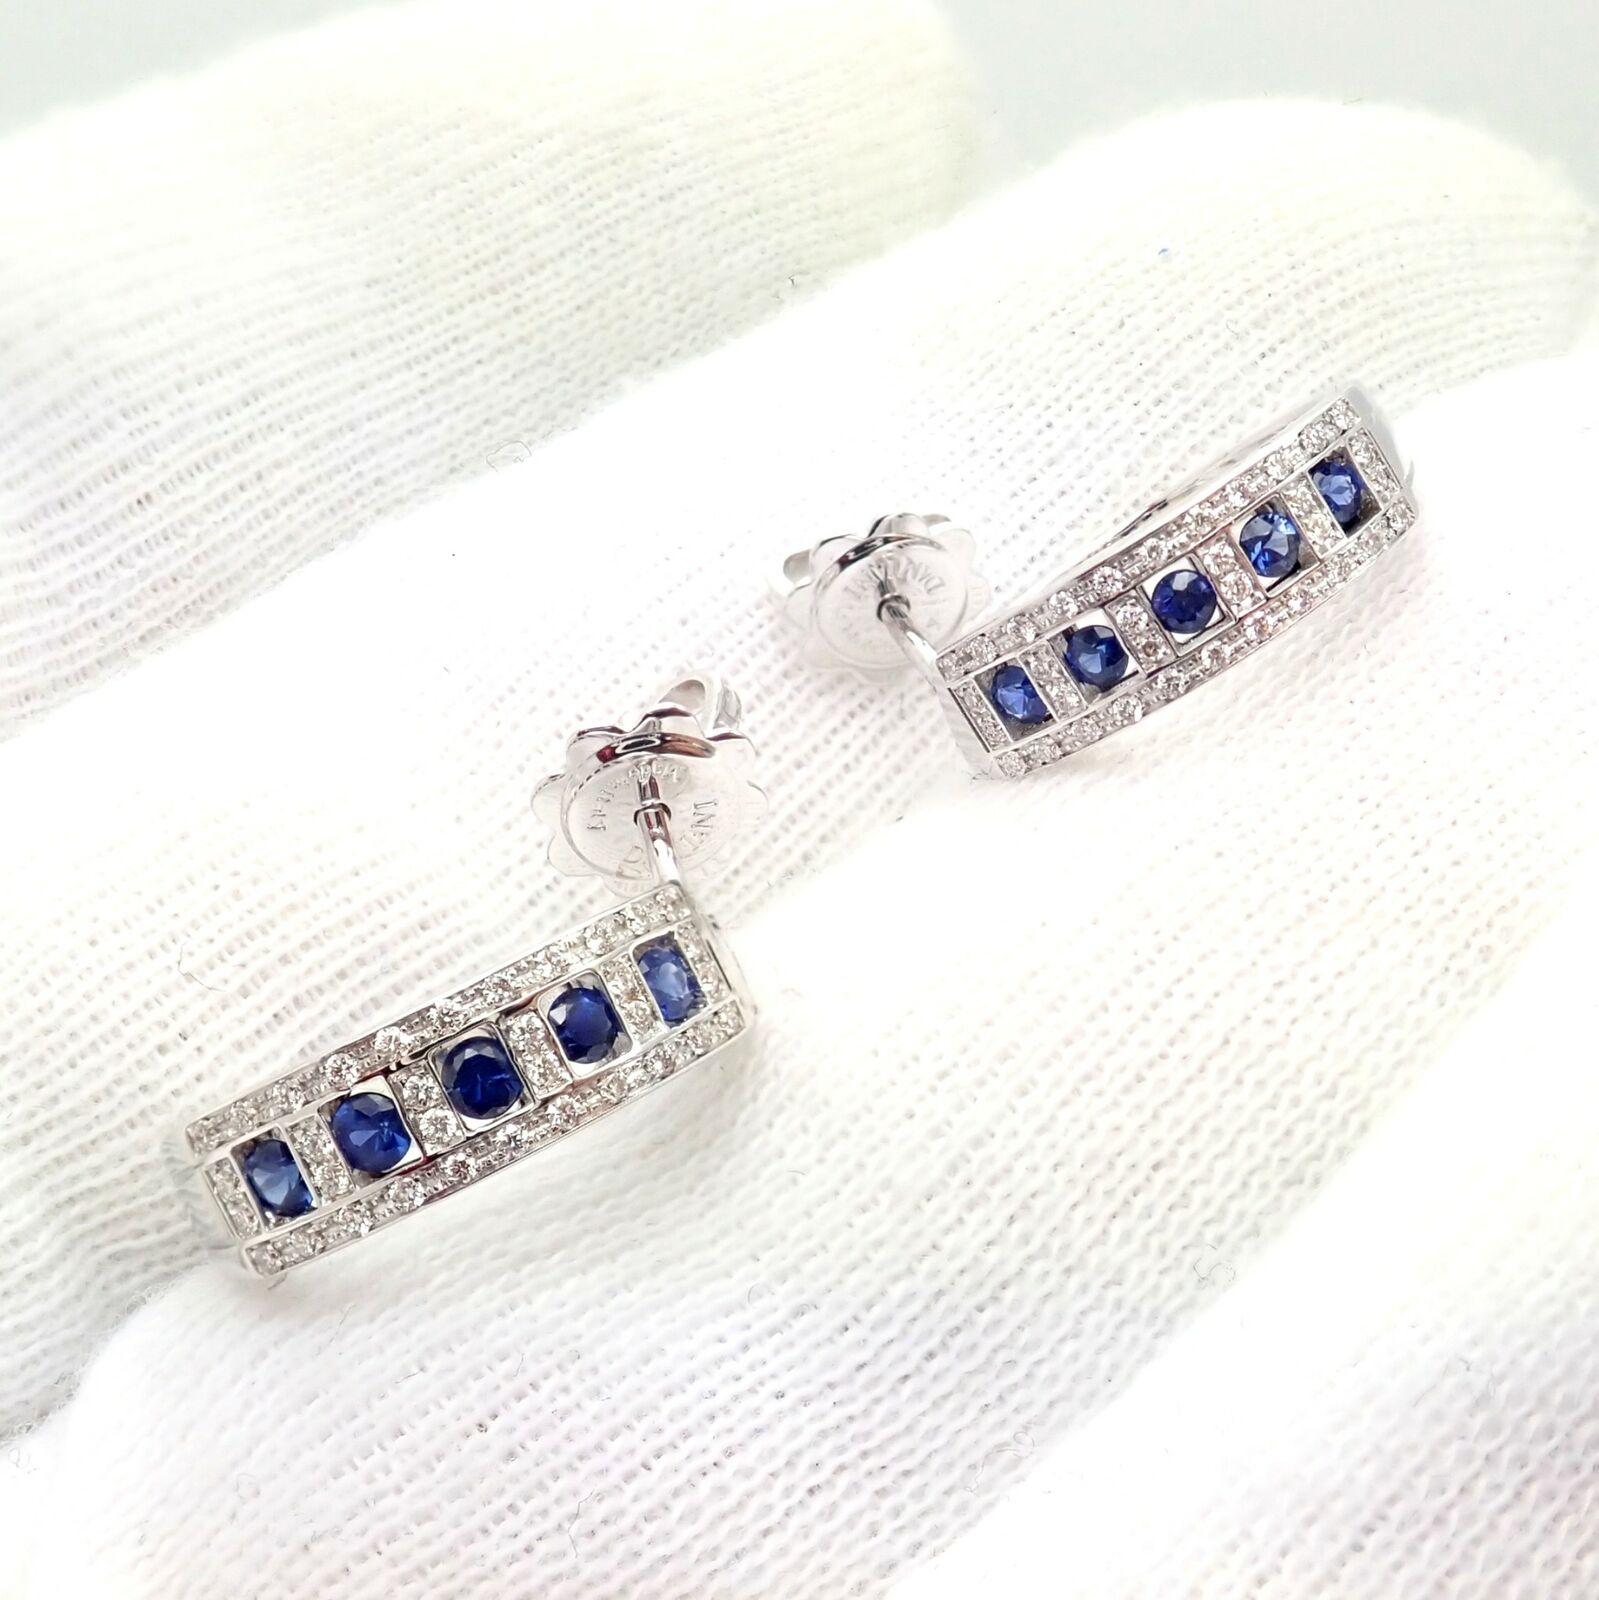 Women's Damiani Belle Epoque Diamond and Sapphire White Gold Hoop Earring For Sale